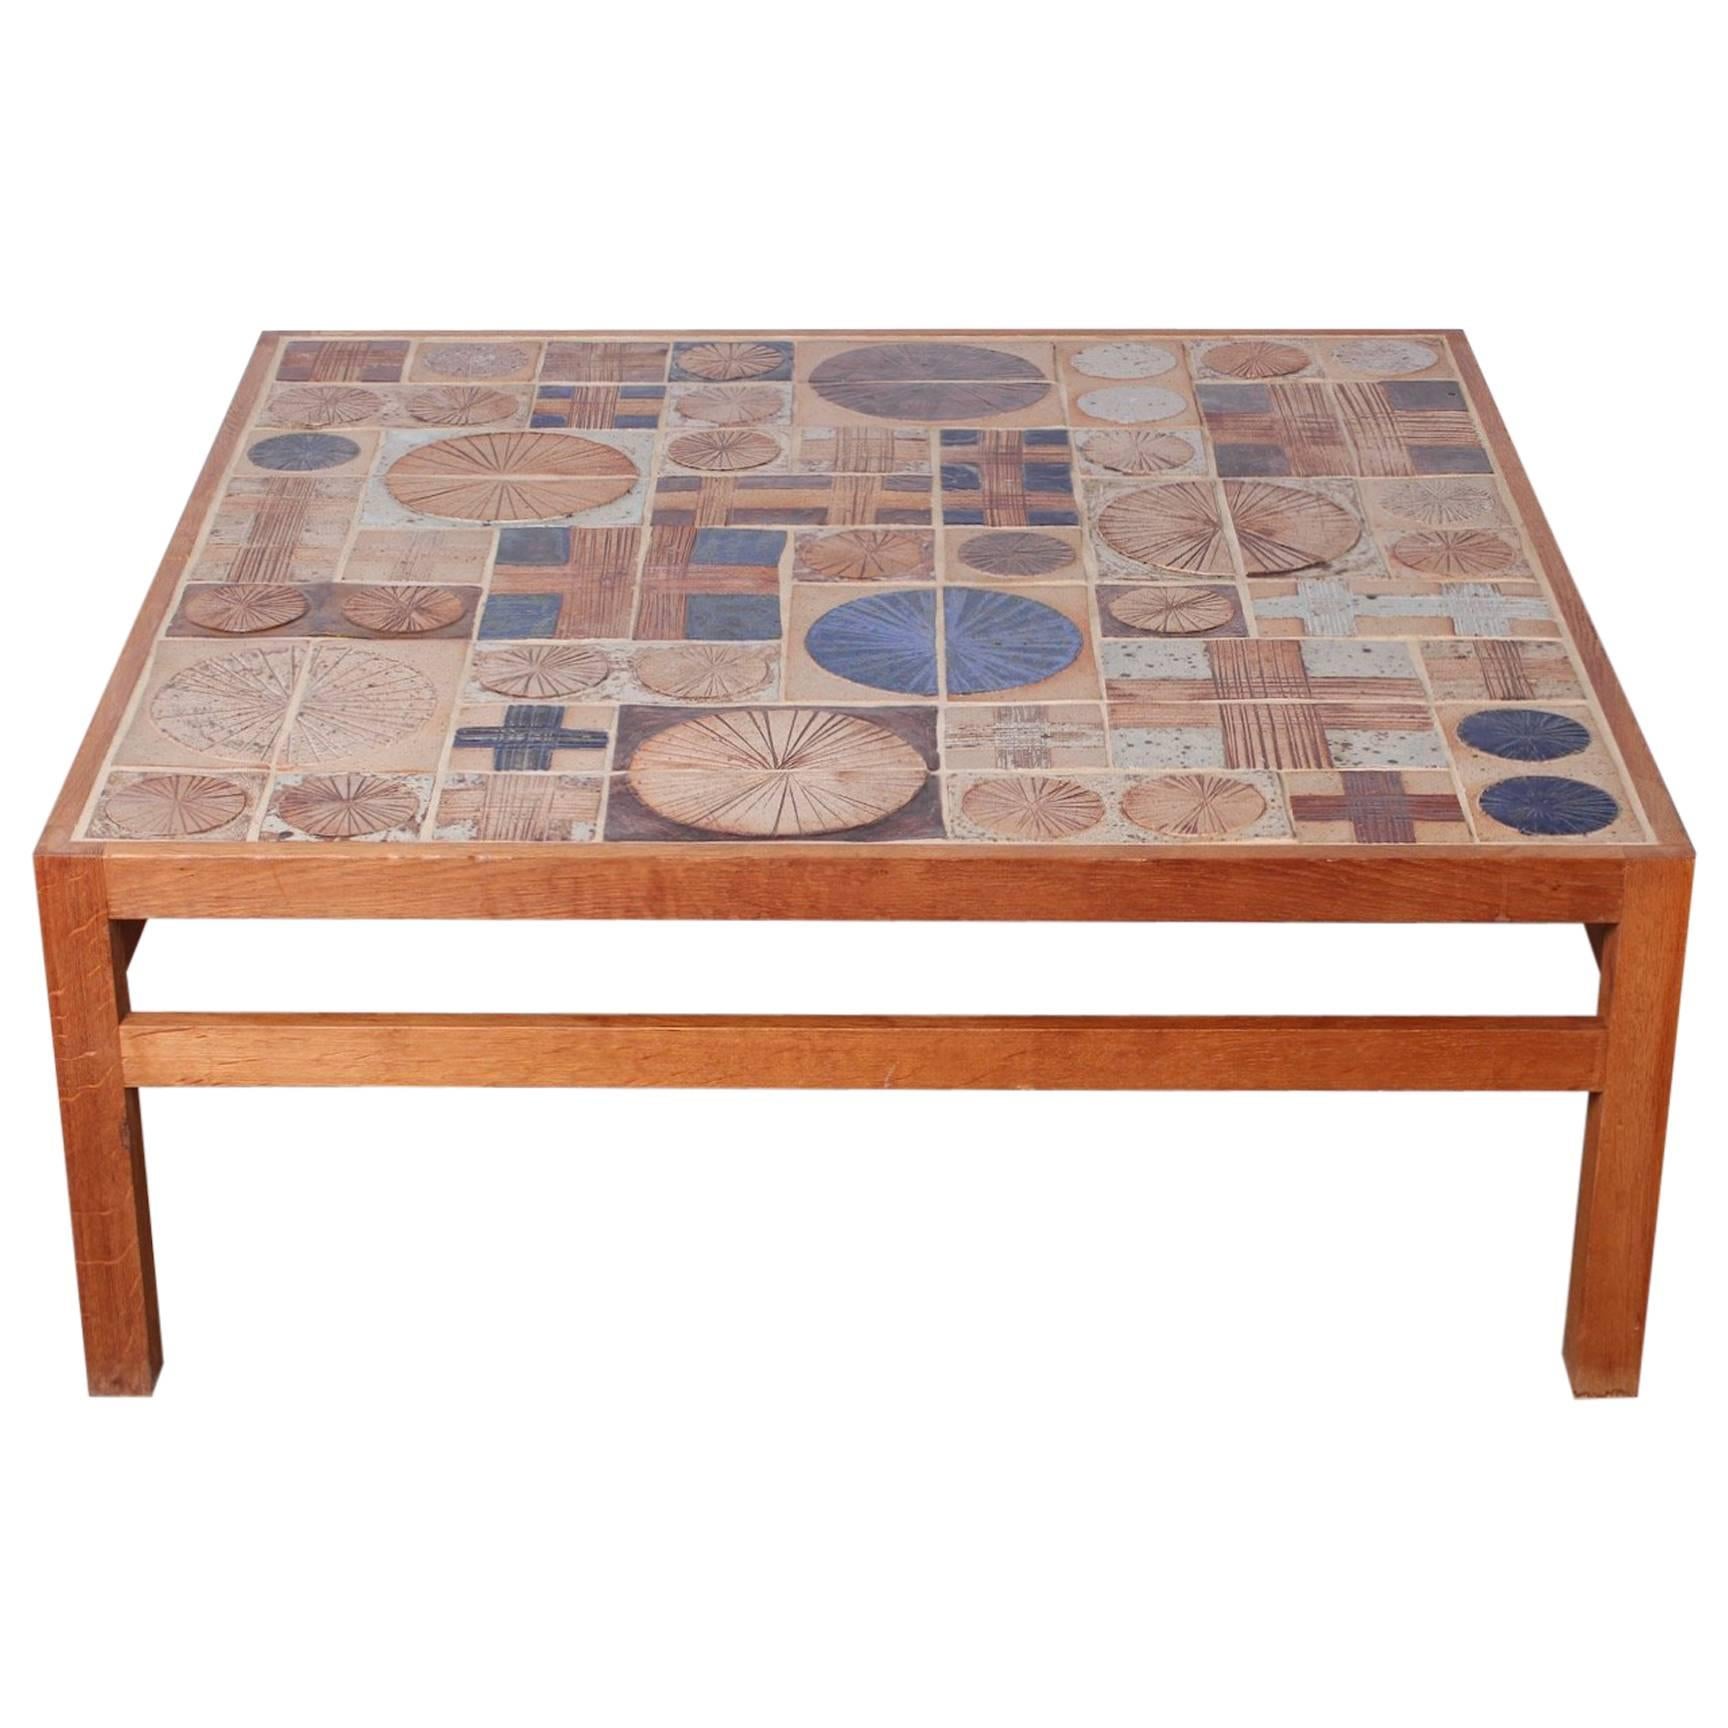 Coffee Table with Ceramic Tiles by Tue Poulsen & Willy Beck